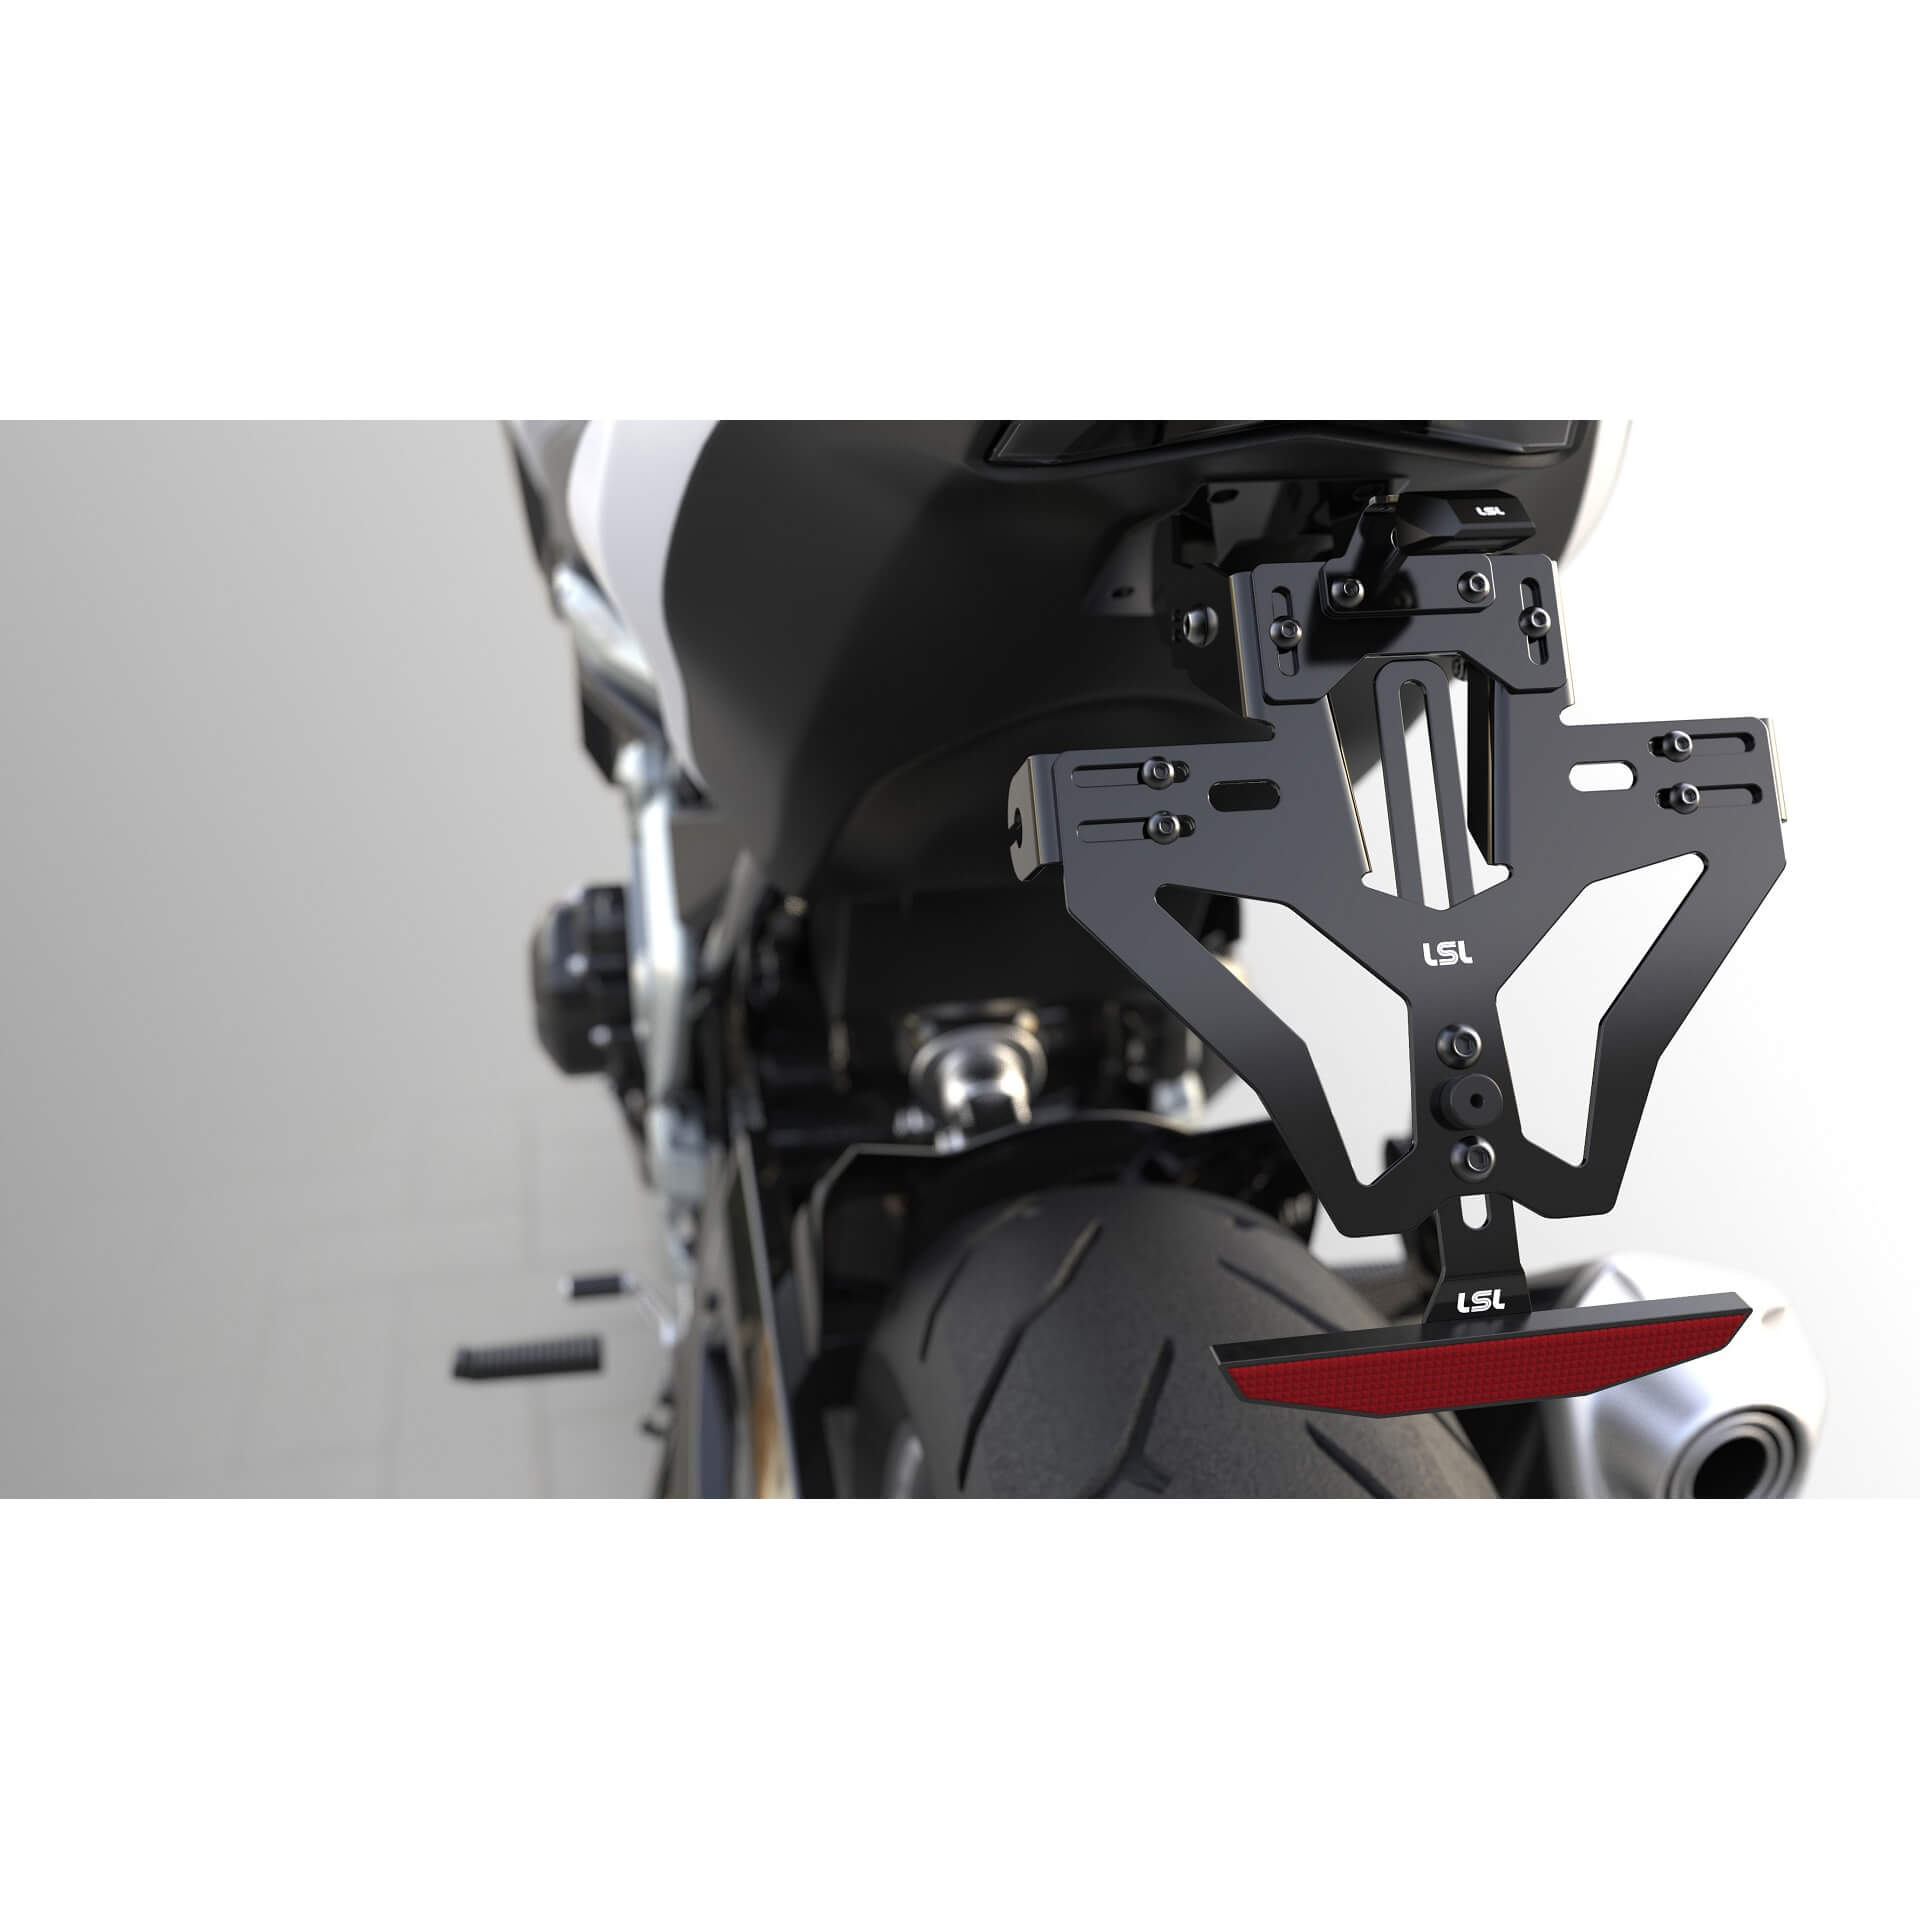 lsl MANTIS-RS PRO for Triumph Speed Triple S /R /RS 16-, incl. license plate illumination